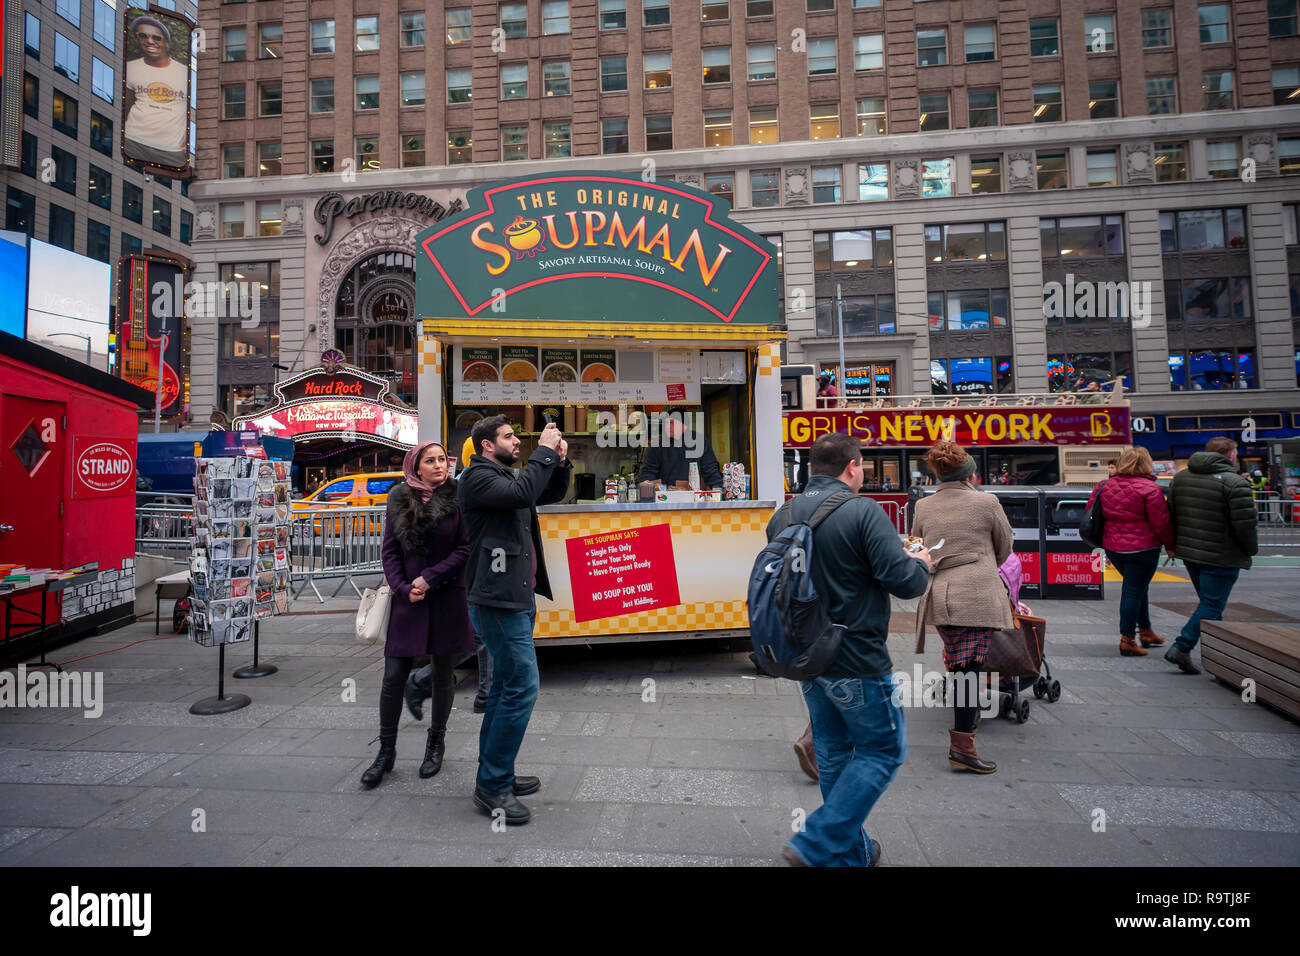 New York,NY/USA-December 17, 2018 The kiosk of the Original Soupman serves soup for you in Times Square in New York on Monday, December 17, 2018. The presence in Times Square is its first brick-and-mortar store since emerging from bankruptcy with new owners. The company also supplies New York City public schools and is available in many delis and supermarkets. (Â© Richard B. Levine) Stock Photo